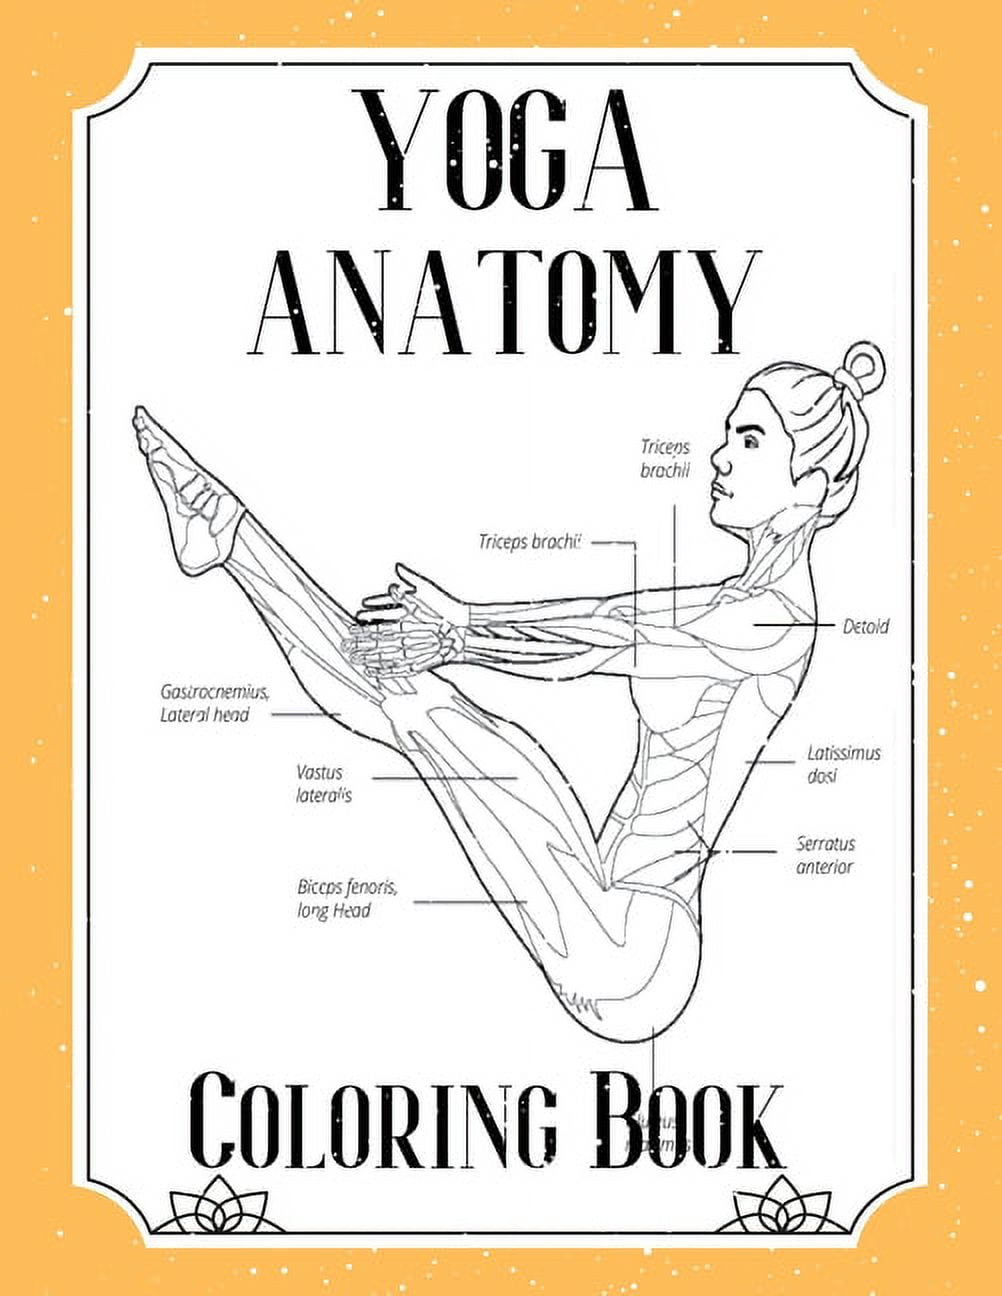 Yoga Activities - Relaxing Coloring Pages - Yoga Pose Cards by Mind Mingle